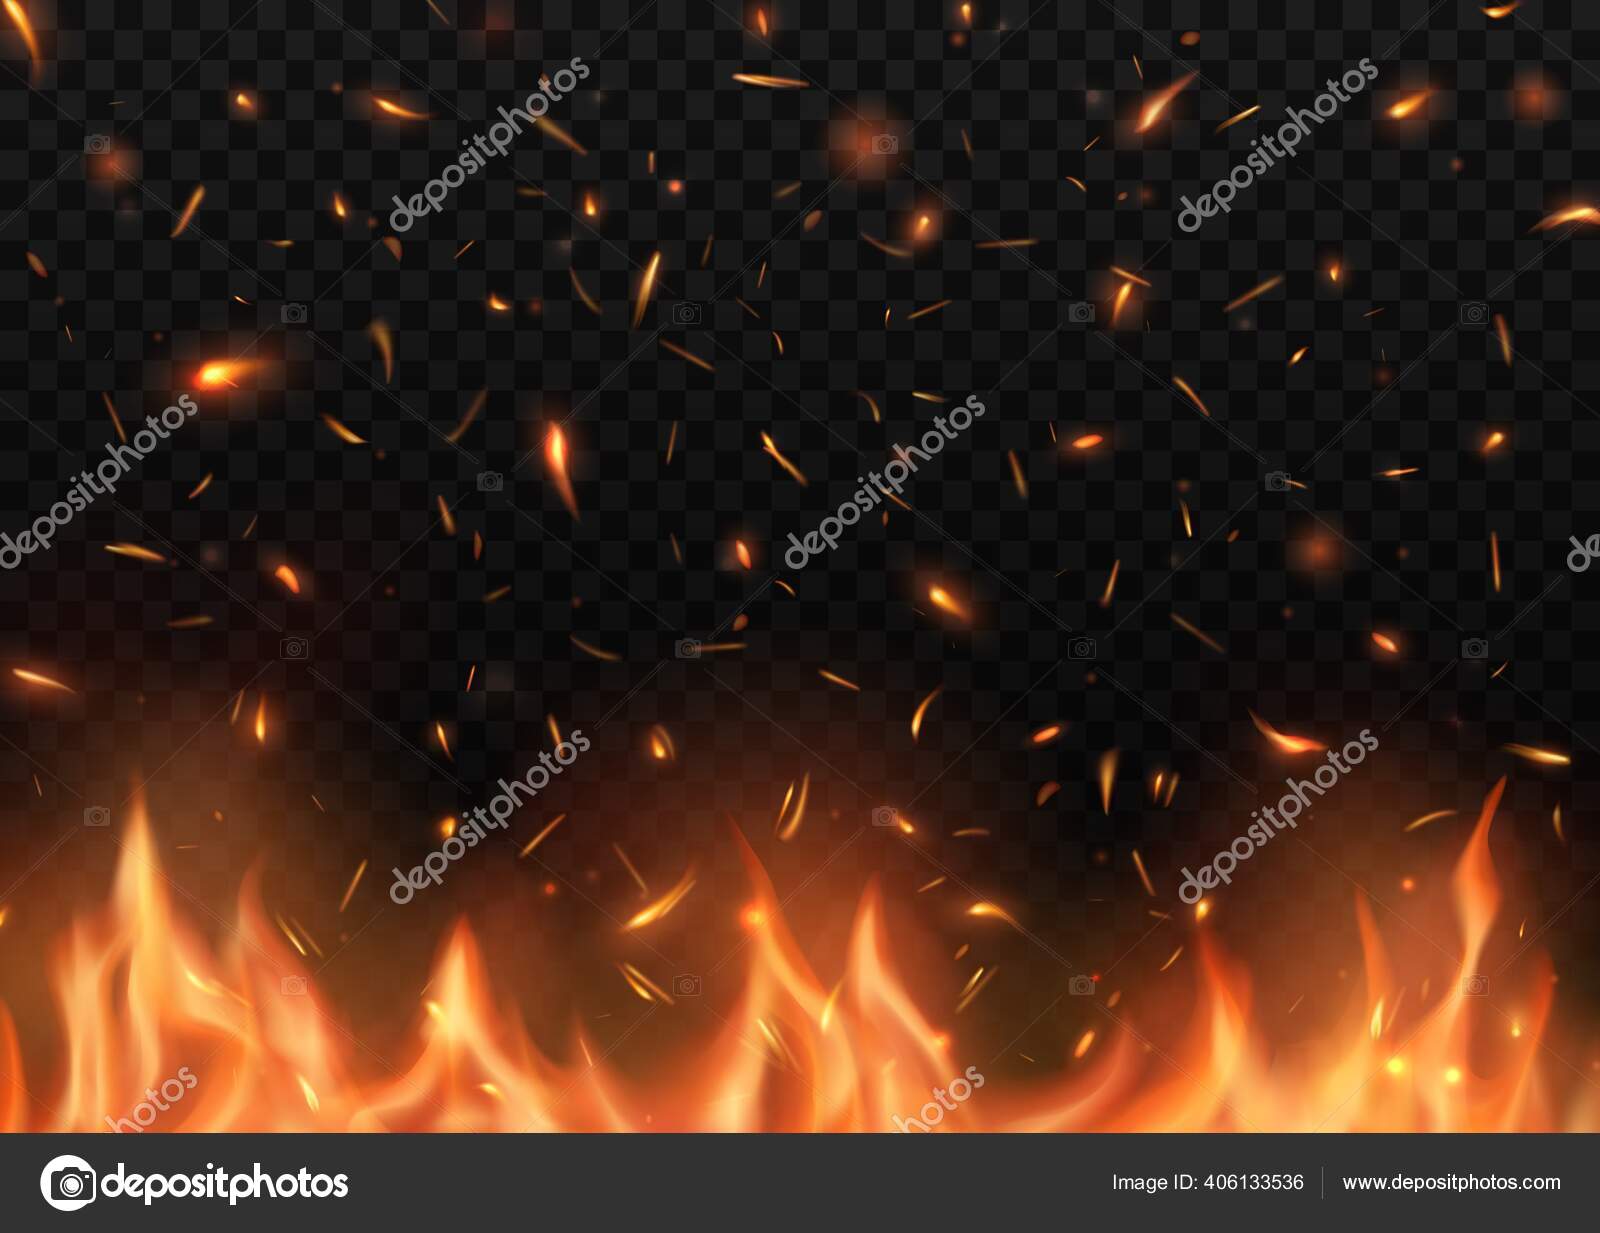 Free Vector, Fire flame burn flare torch hell fiery icons set isolated  vector illustration